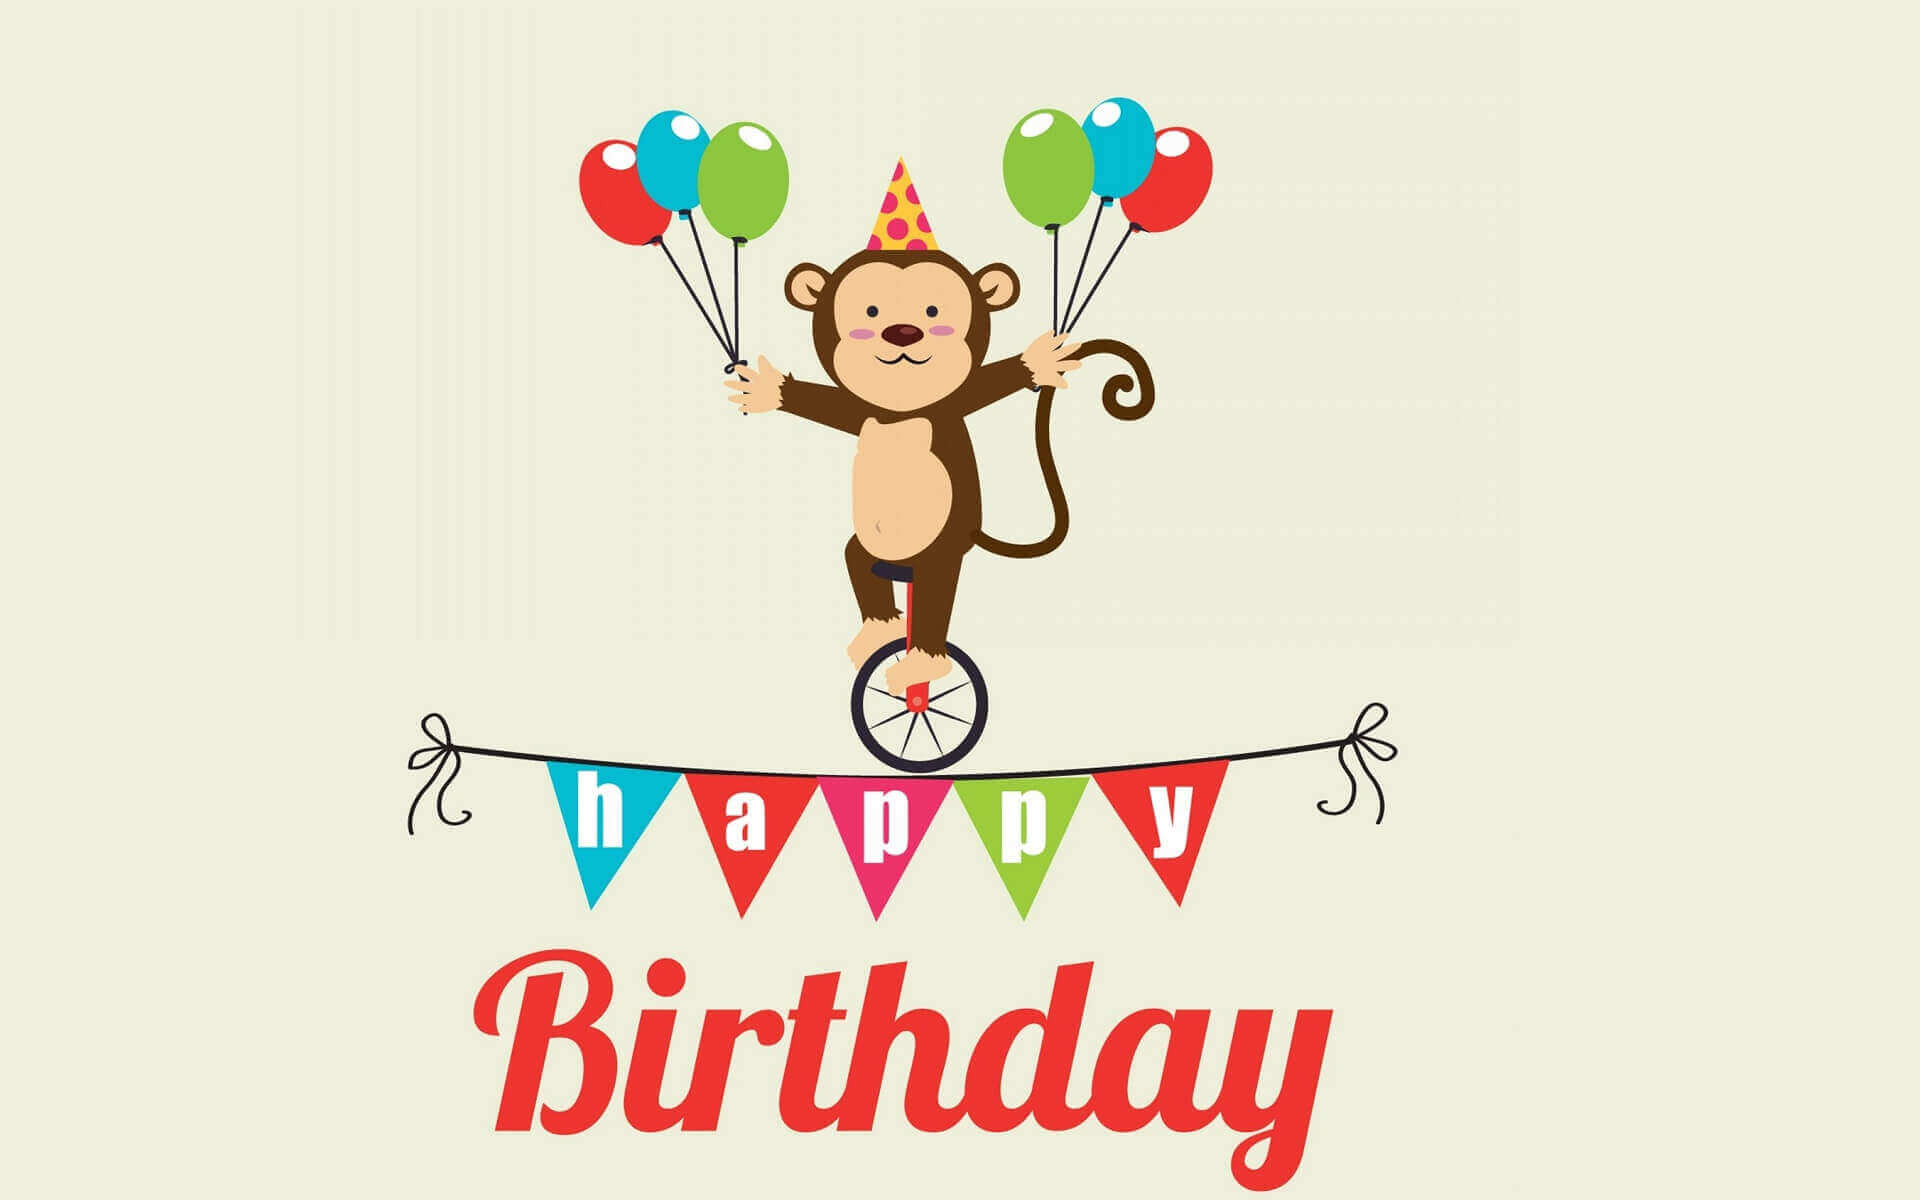 Birthday Wishes To A Friend Funny
 200 Funny Happy Birthday Wishes Quotes Ever FungiStaaan